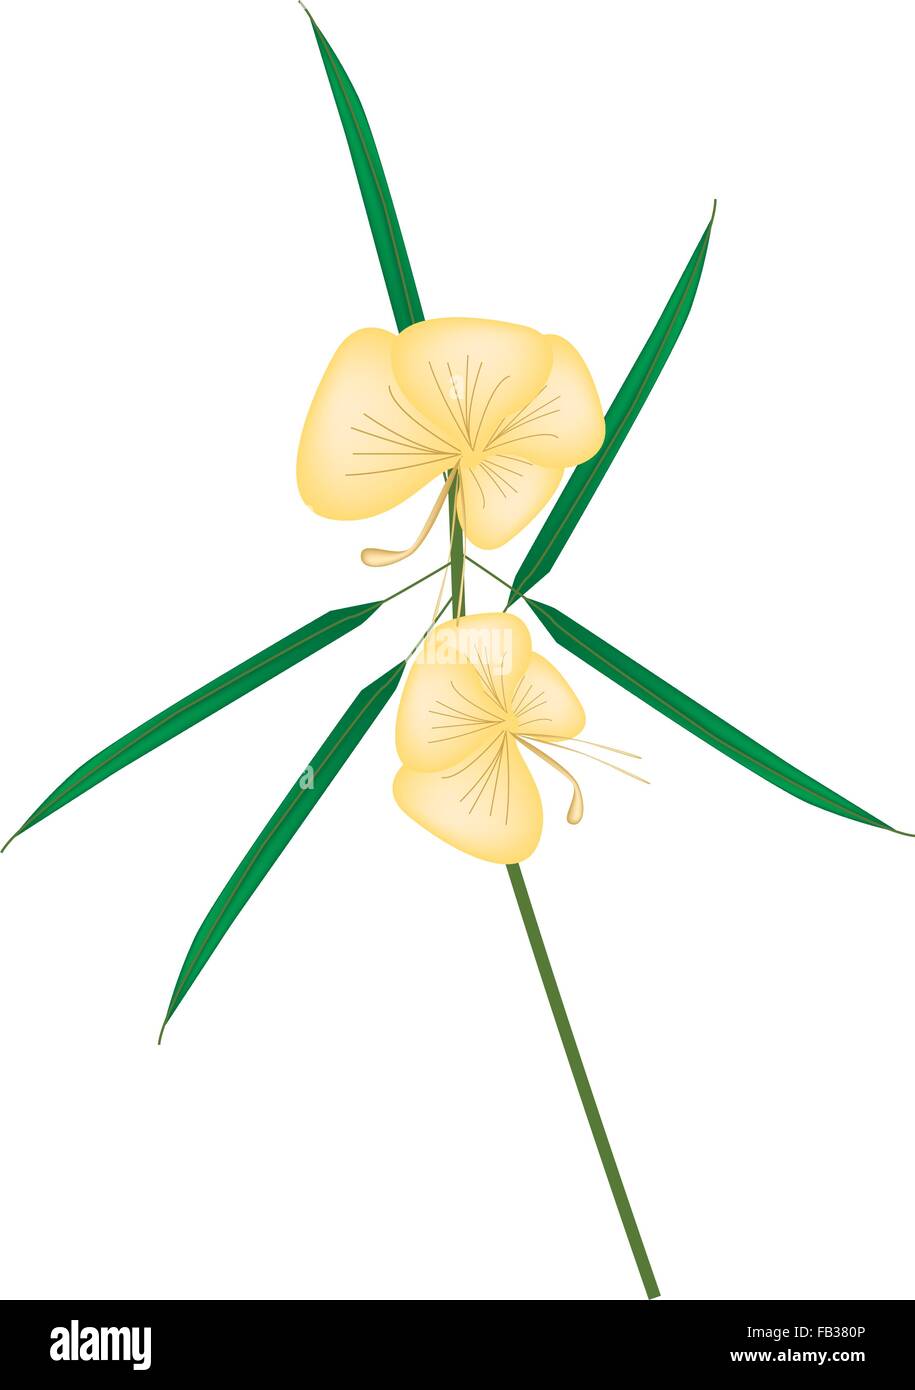 Beautiful Flower, Illustration of Yellow Barleria Lupulina Lindl Flower with Green Leaves Isolated on White Background. Stock Vector